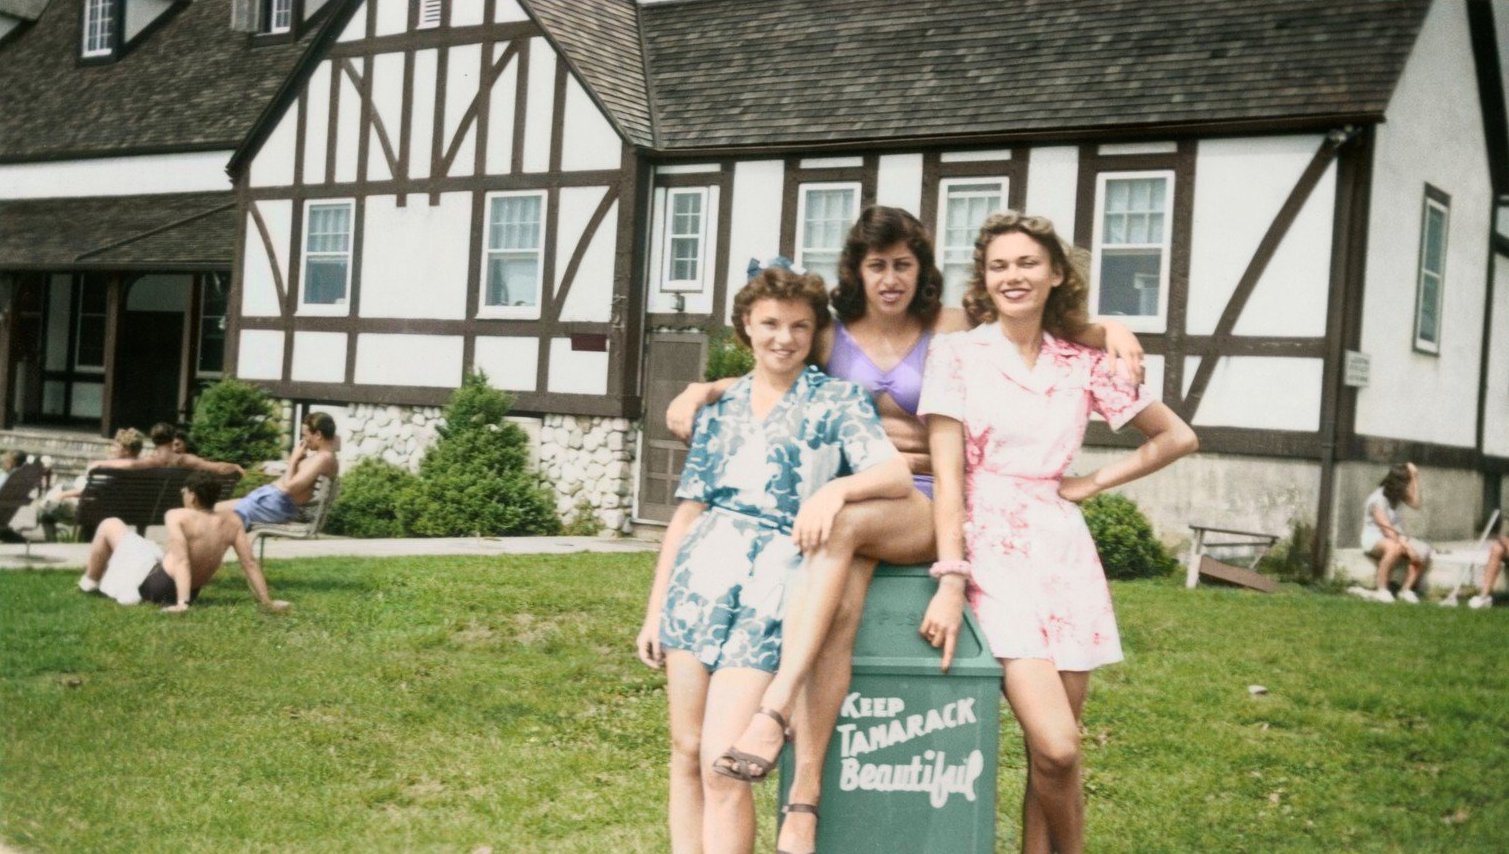 An old color photograph shows three women in brightly-colored summertime outfits smiling for the camera with their arms draped around each other, perched on a trashcan that reads “Keep Tamarack Beautiful.” Behind them is a summer resort with other vacationers dotting the area behind them.